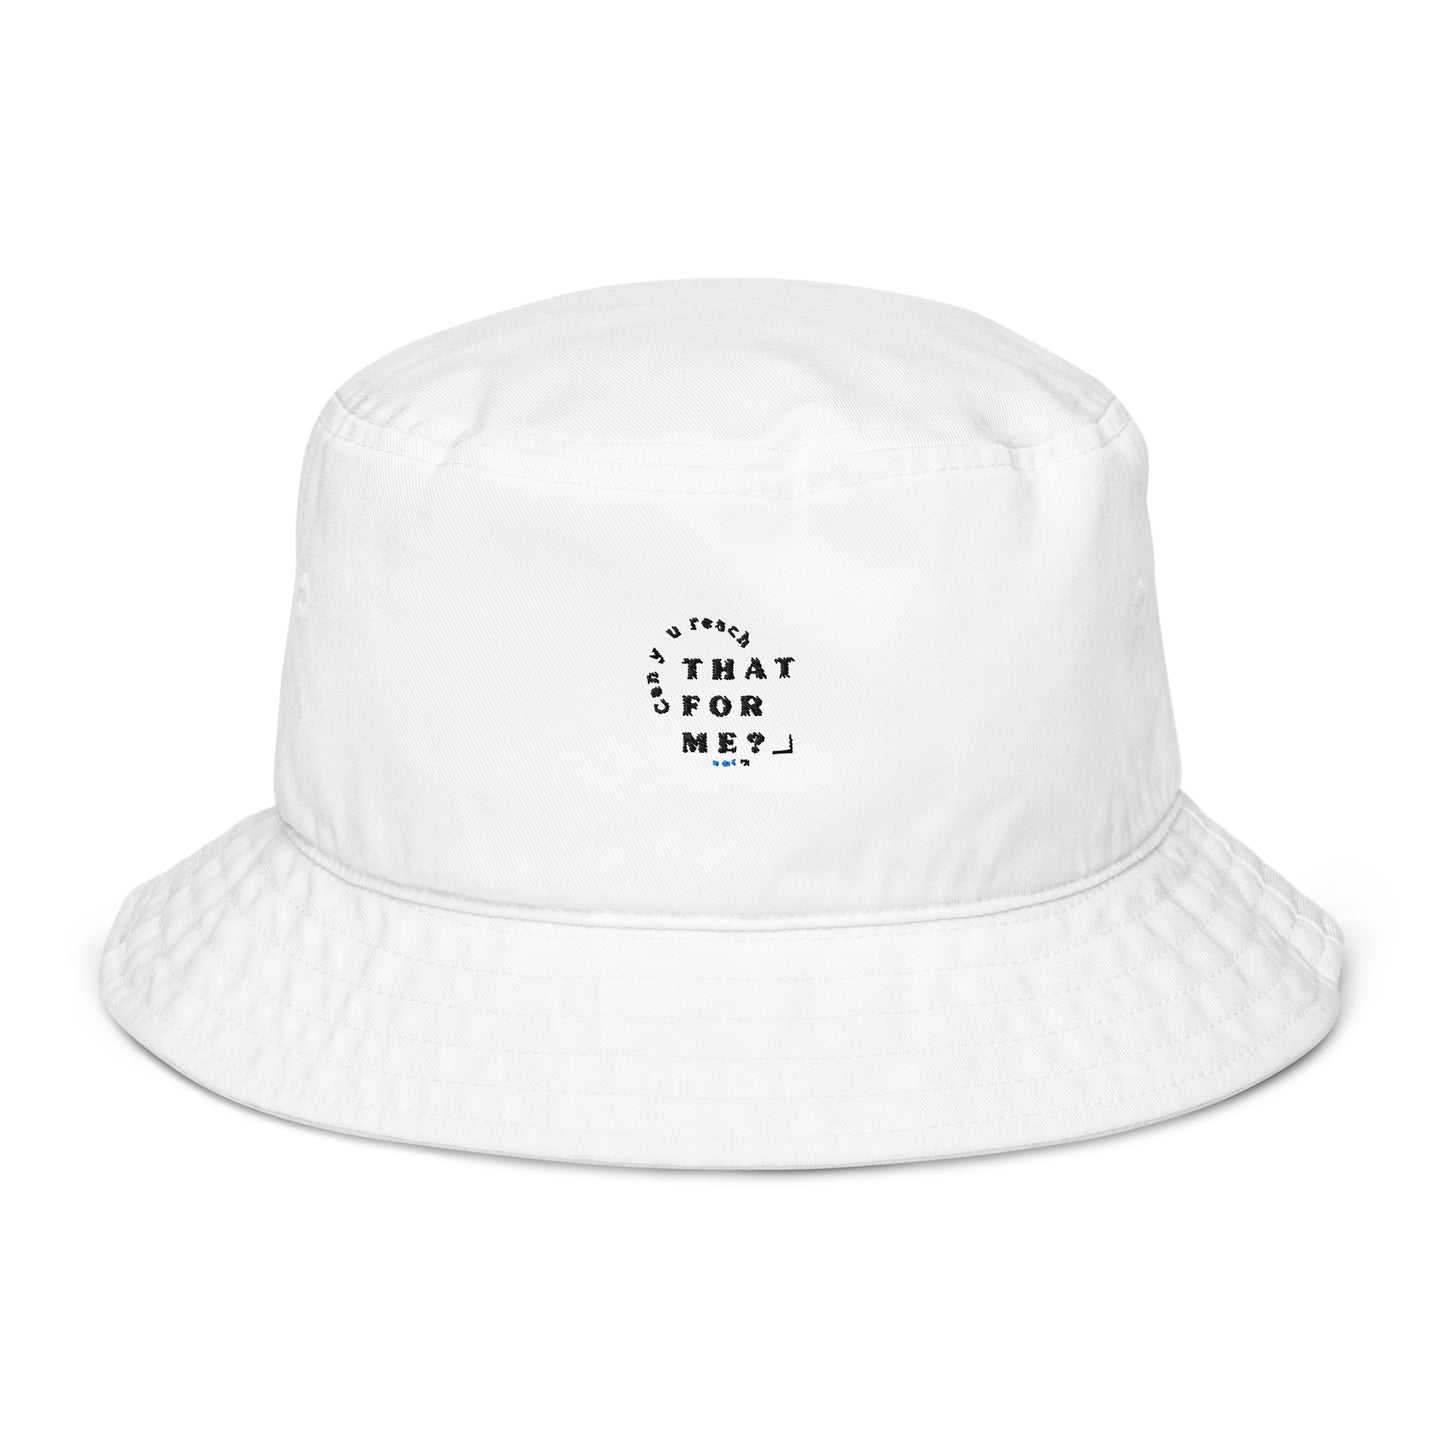 Organic bucket hat - Can you reach that for me?